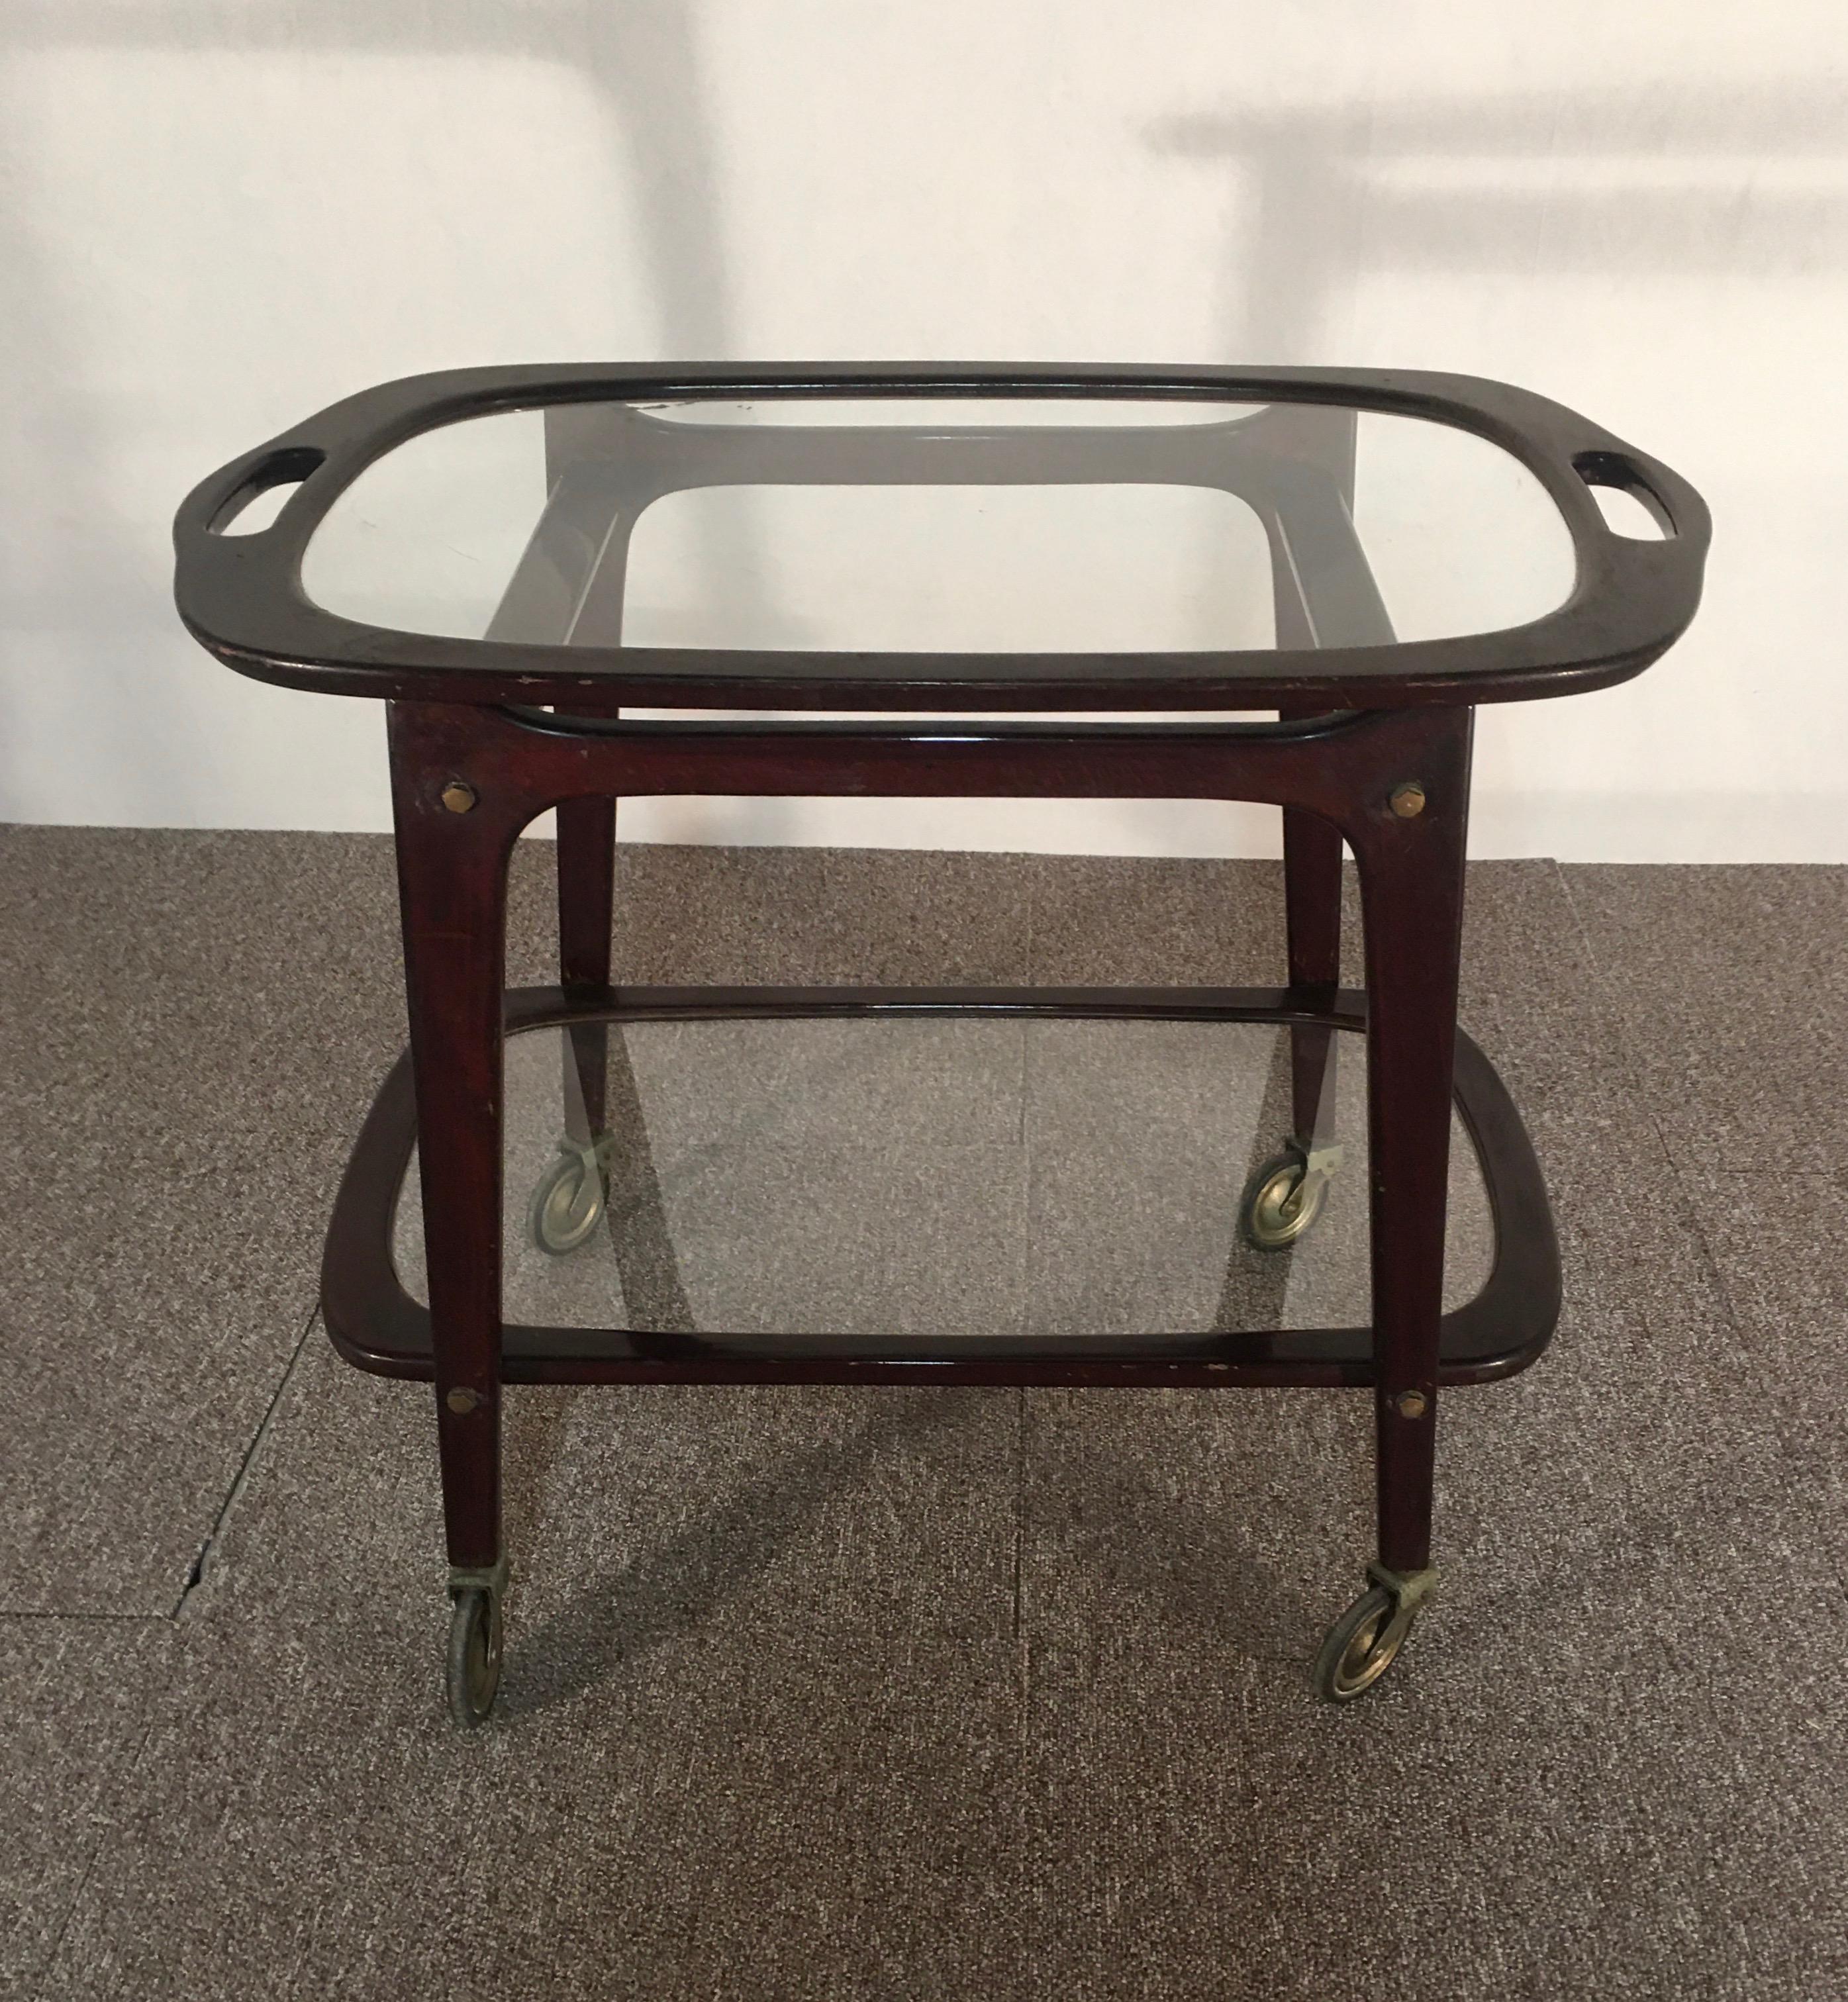 The cart is in mahogany stained beech. IT has a double glass top. With casters. Good condition.